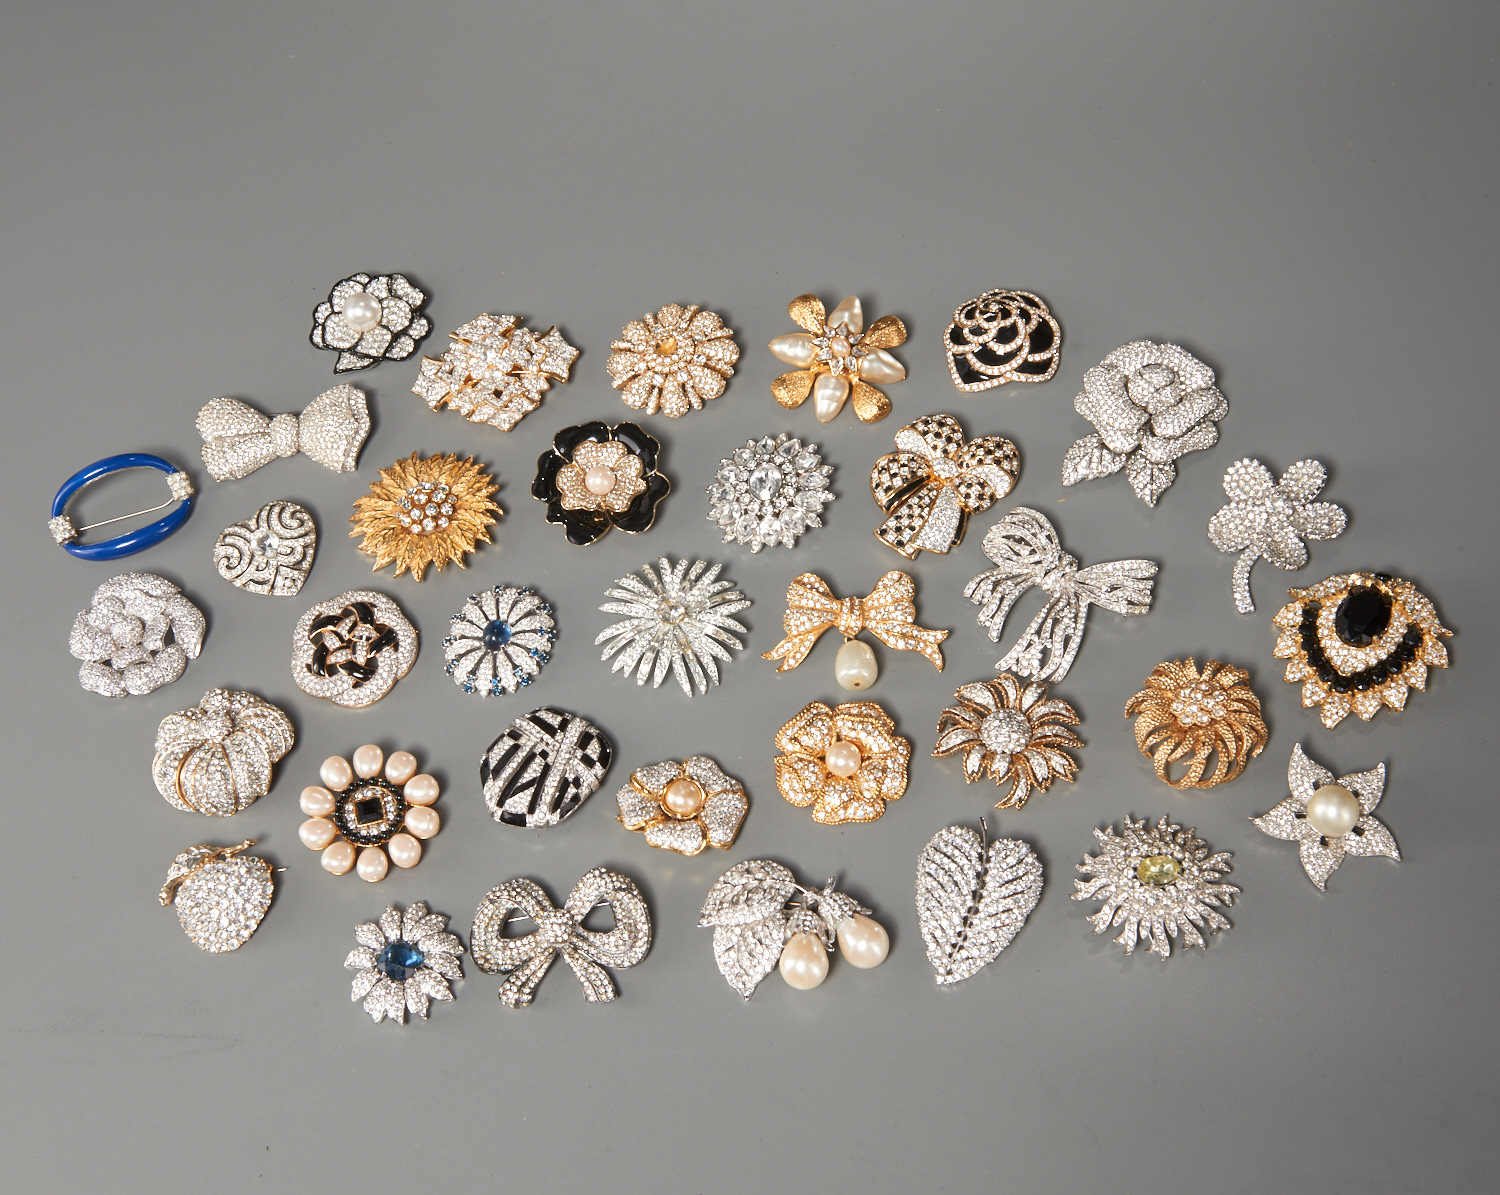 Grouping of Costume Jewelry Brooches